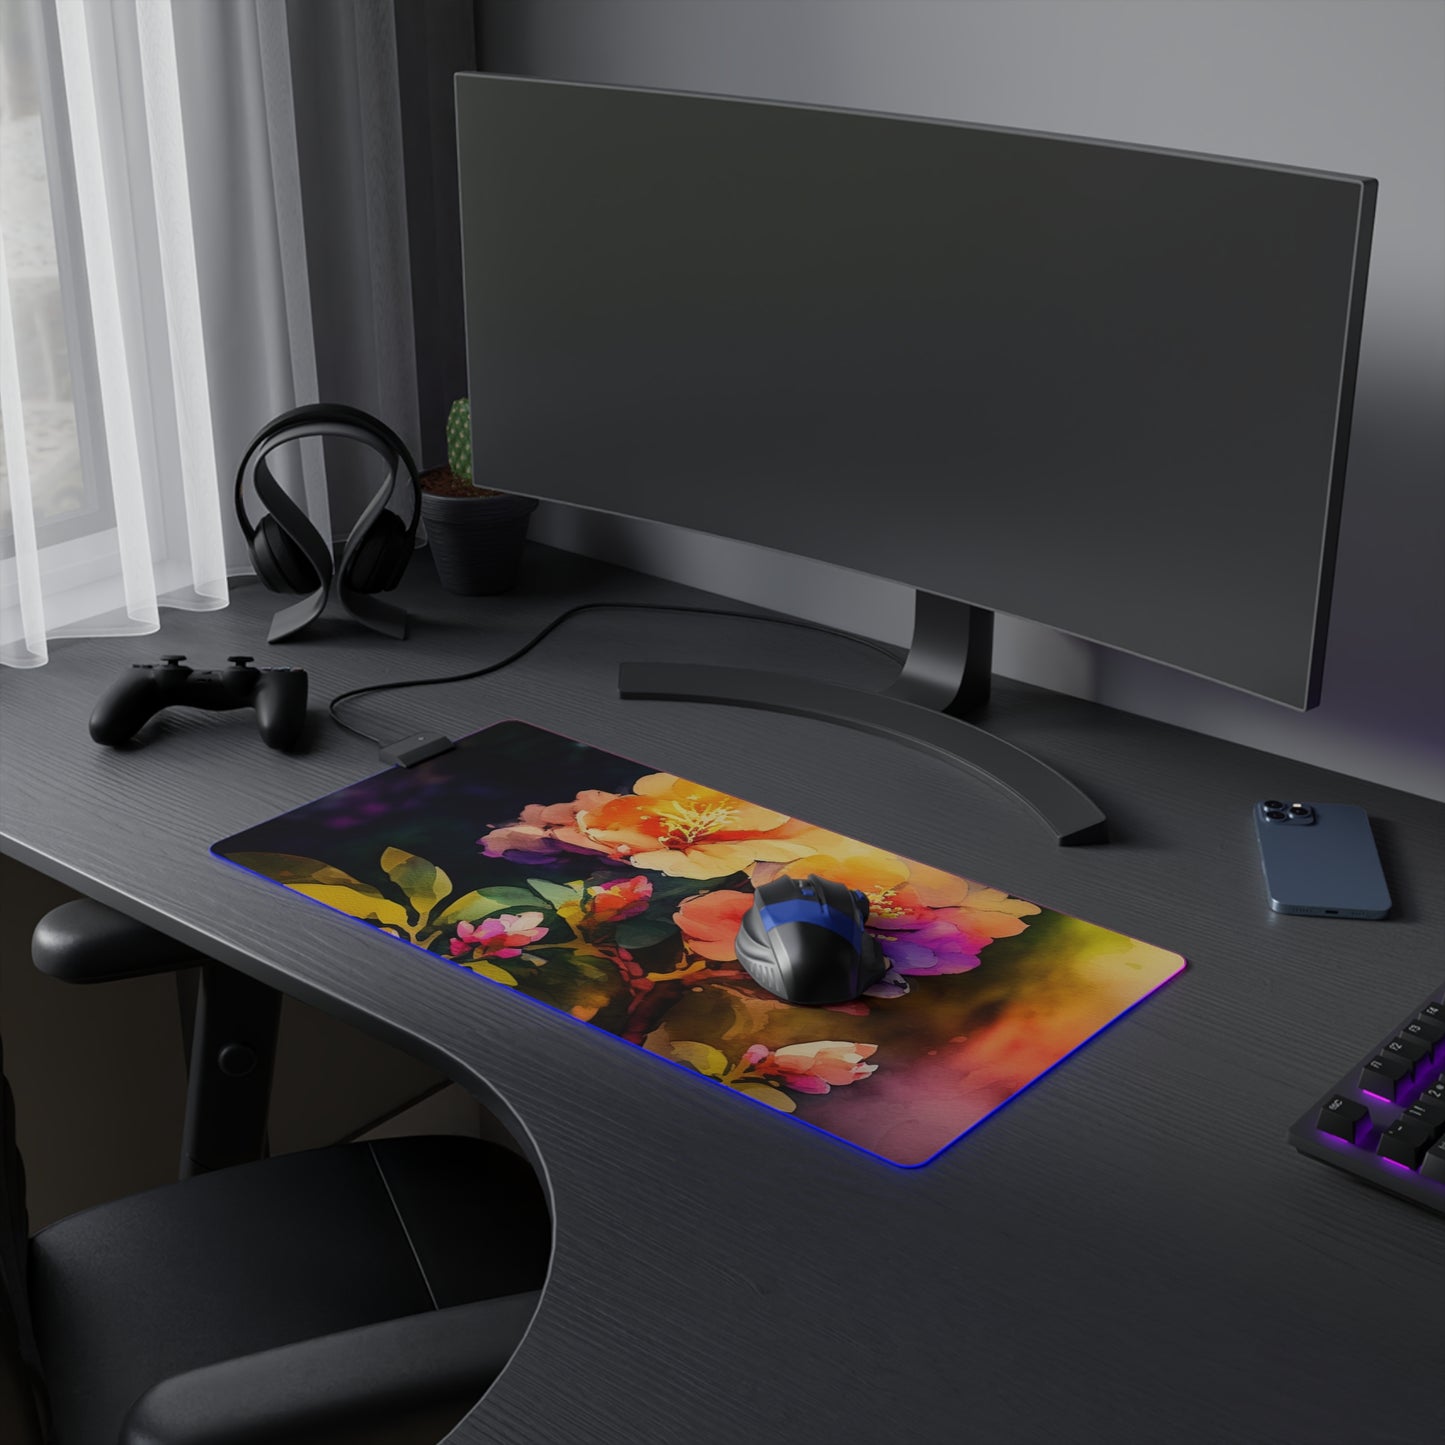 LED Gaming Mouse Pad Bright Spring Flowers 2